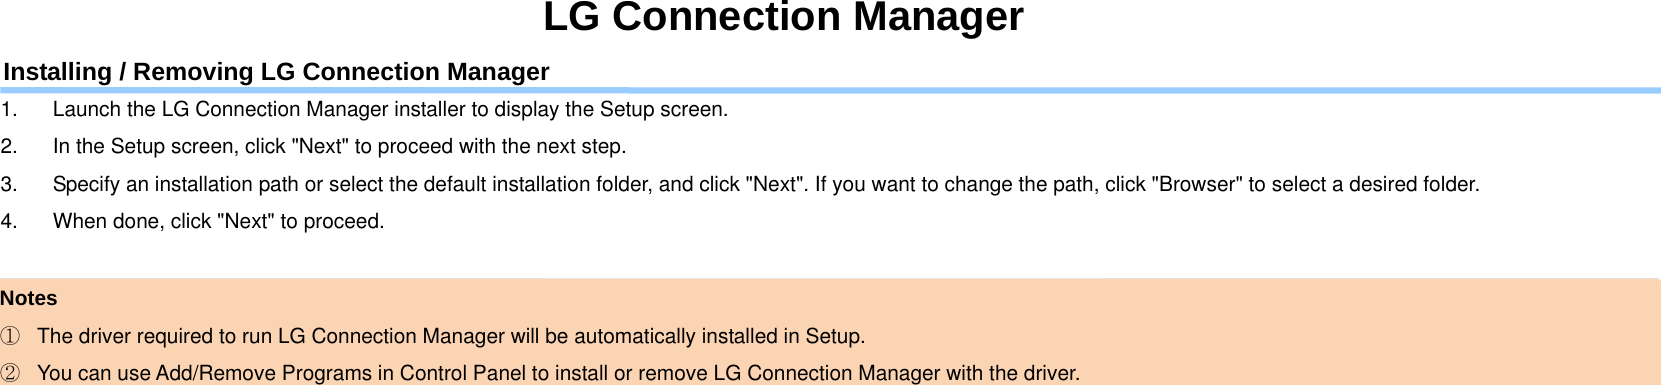 LG Connection Manager Installing / Removing LG Connection Manager 1.  Launch the LG Connection Manager installer to display the Setup screen. 2.  In the Setup screen, click &quot;Next&quot; to proceed with the next step. 3.  Specify an installation path or select the default installation folder, and click &quot;Next&quot;. If you want to change the path, click &quot;Browser&quot; to select a desired folder. 4.  When done, click &quot;Next&quot; to proceed.  Notes ①  The driver required to run LG Connection Manager will be automatically installed in Setup. ②  You can use Add/Remove Programs in Control Panel to install or remove LG Connection Manager with the driver. 